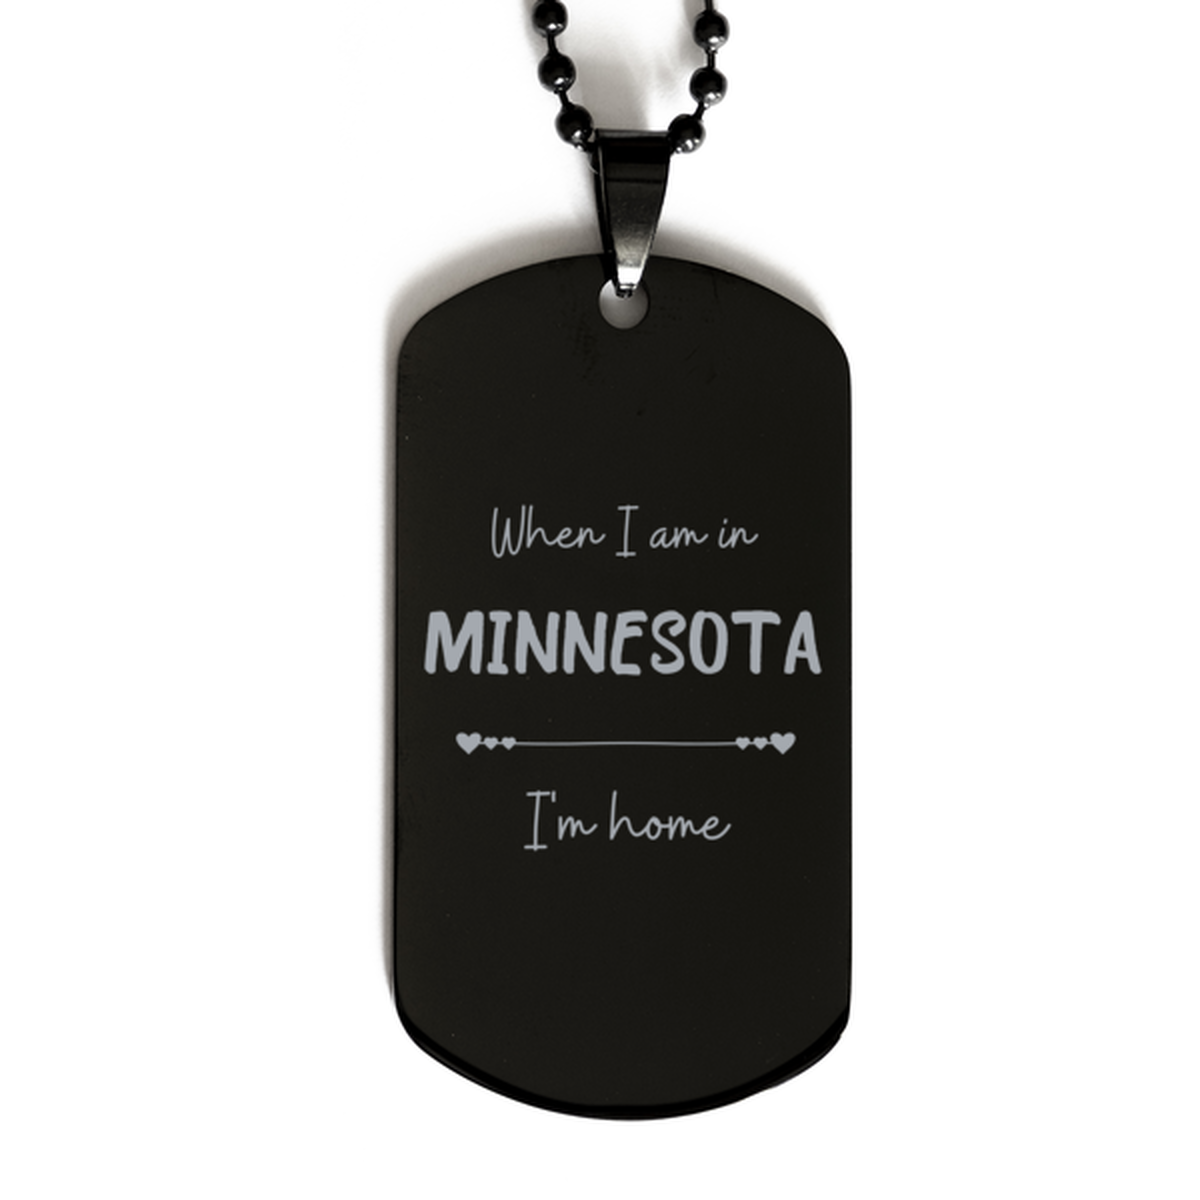 When I am in Minnesota I'm home Black Dog Tag, Cheap Gifts For Minnesota, State Minnesota Birthday Gifts for Friends Coworker